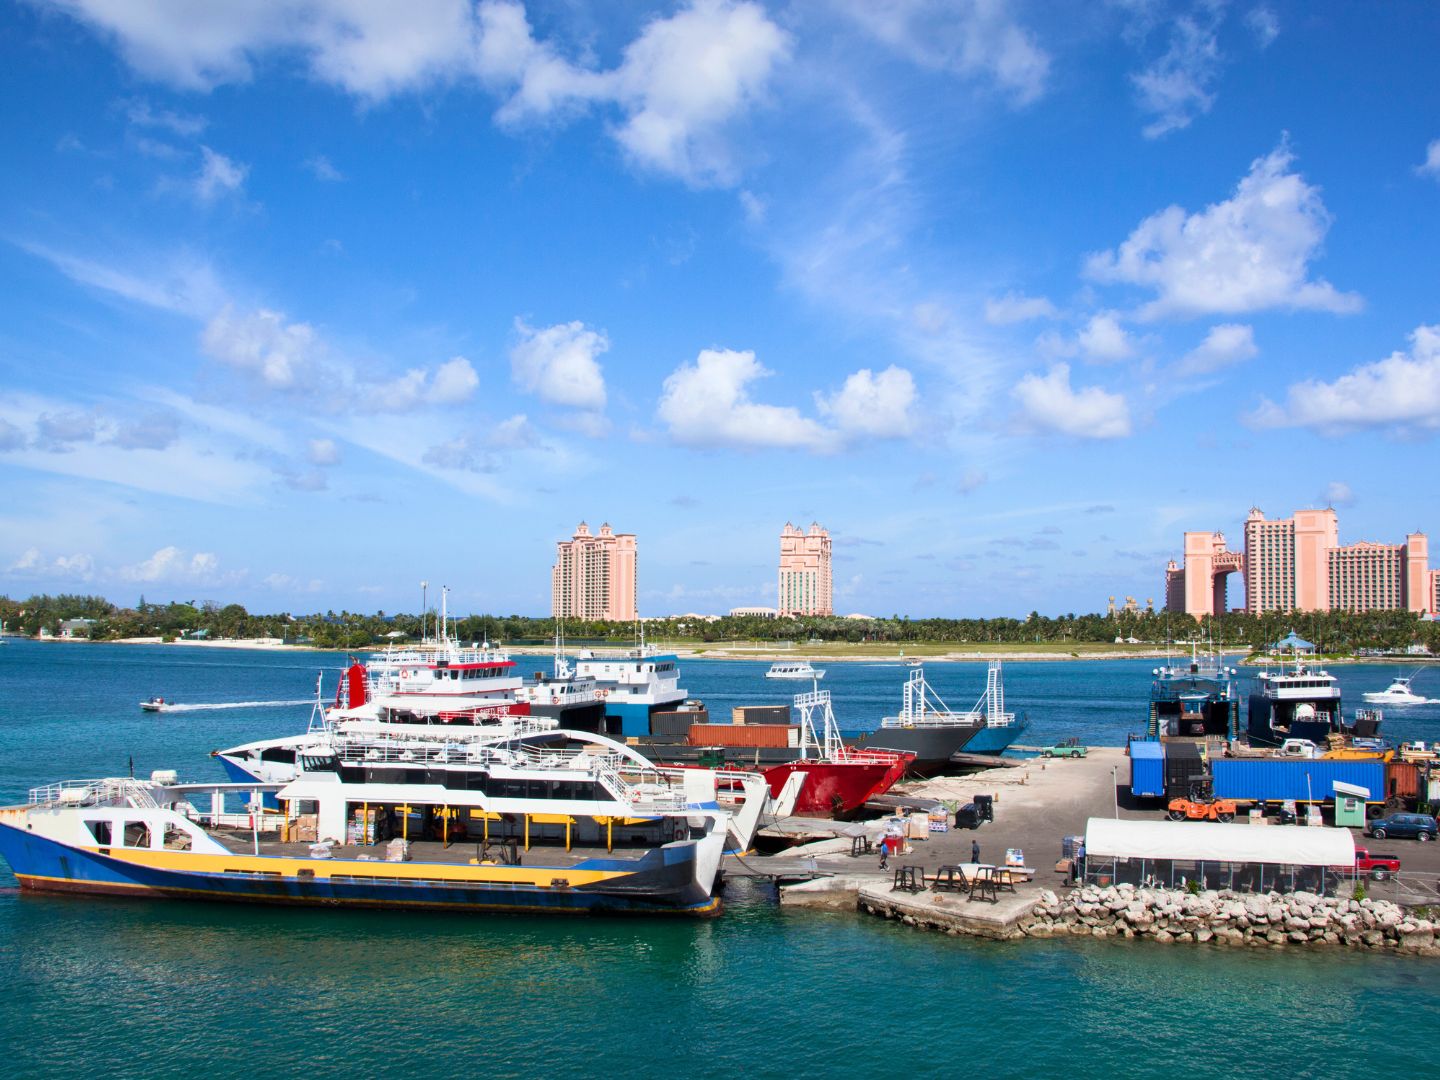 Bahamas Ferry Port - Getty Images